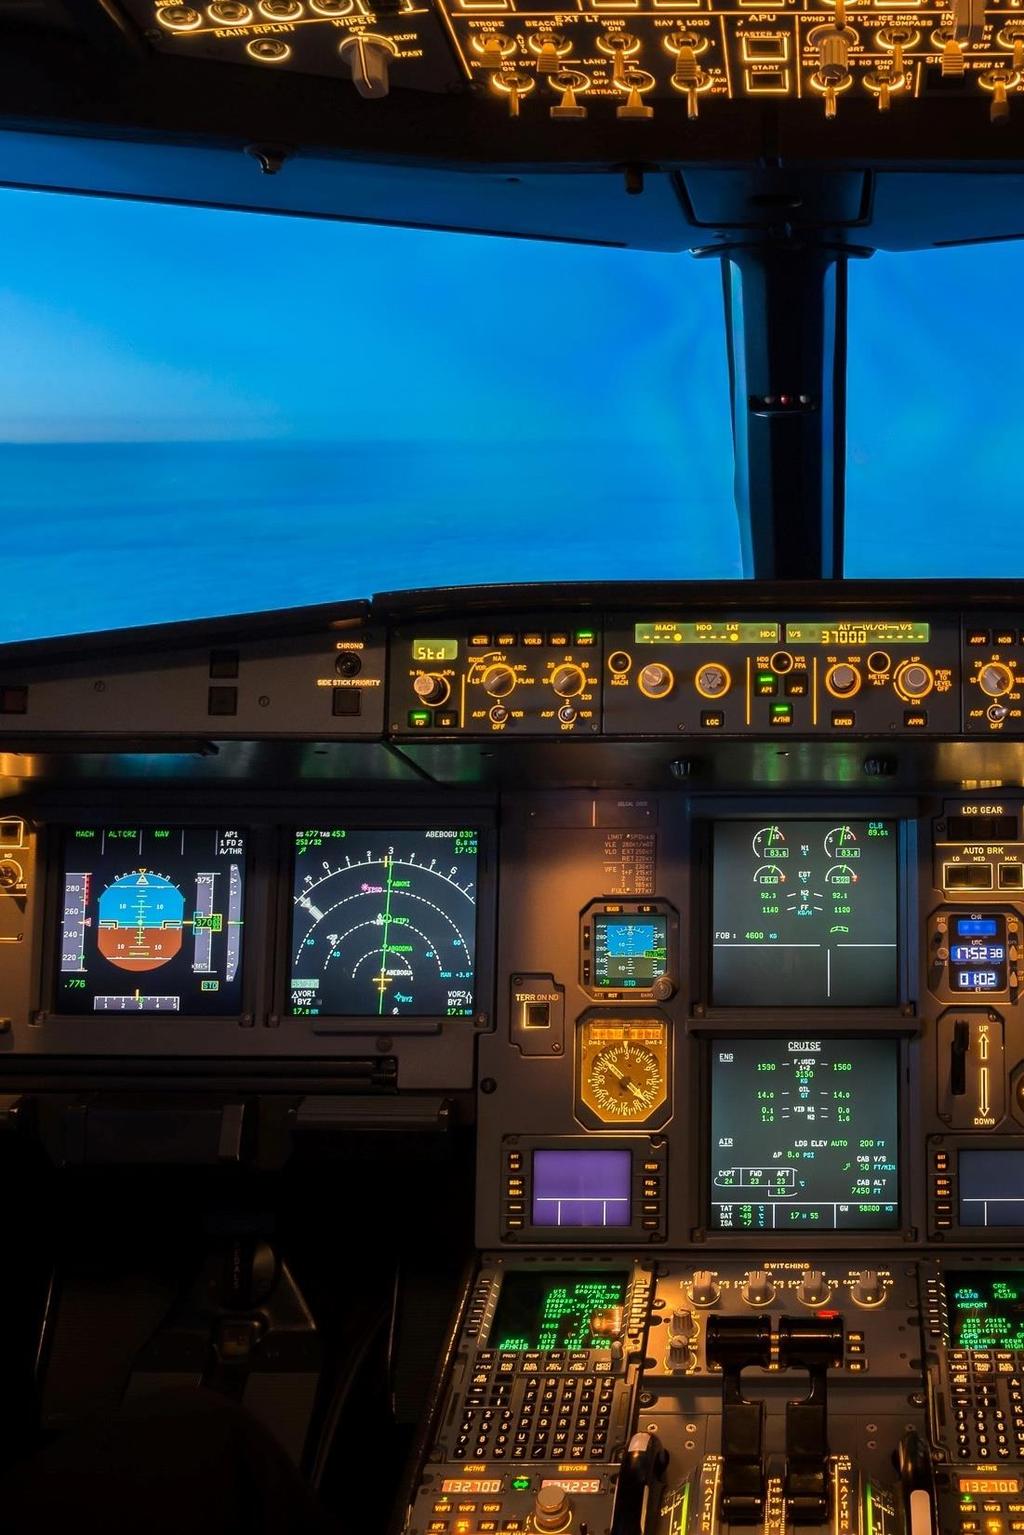 Purchase Leasebacks Financing aircraft orders or monetizing owned assets via PLBs maintains timelines designated by an airline while eliminating risks of ownership GECAS